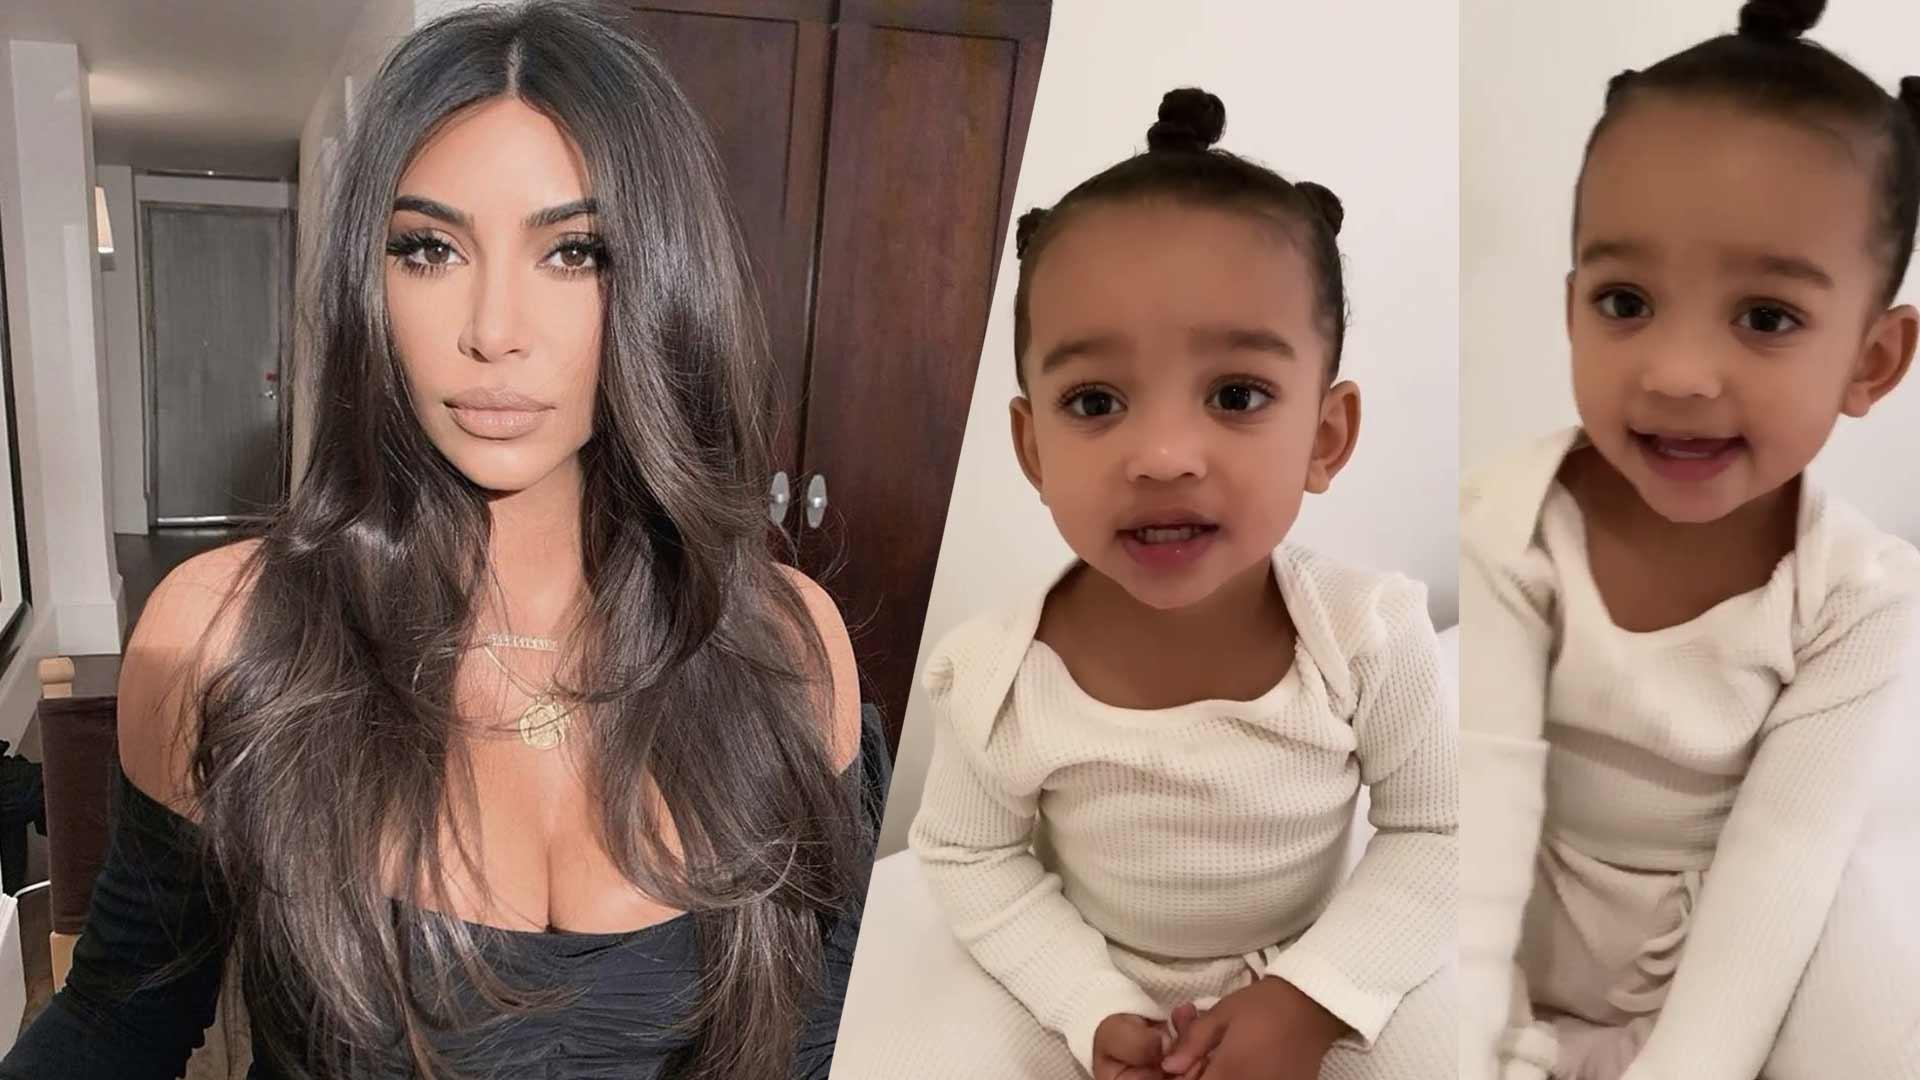 Chicago West Tells Mommy Kim Kardashian Which Classic Cartoon Character She Wants On her Birthday Cake!